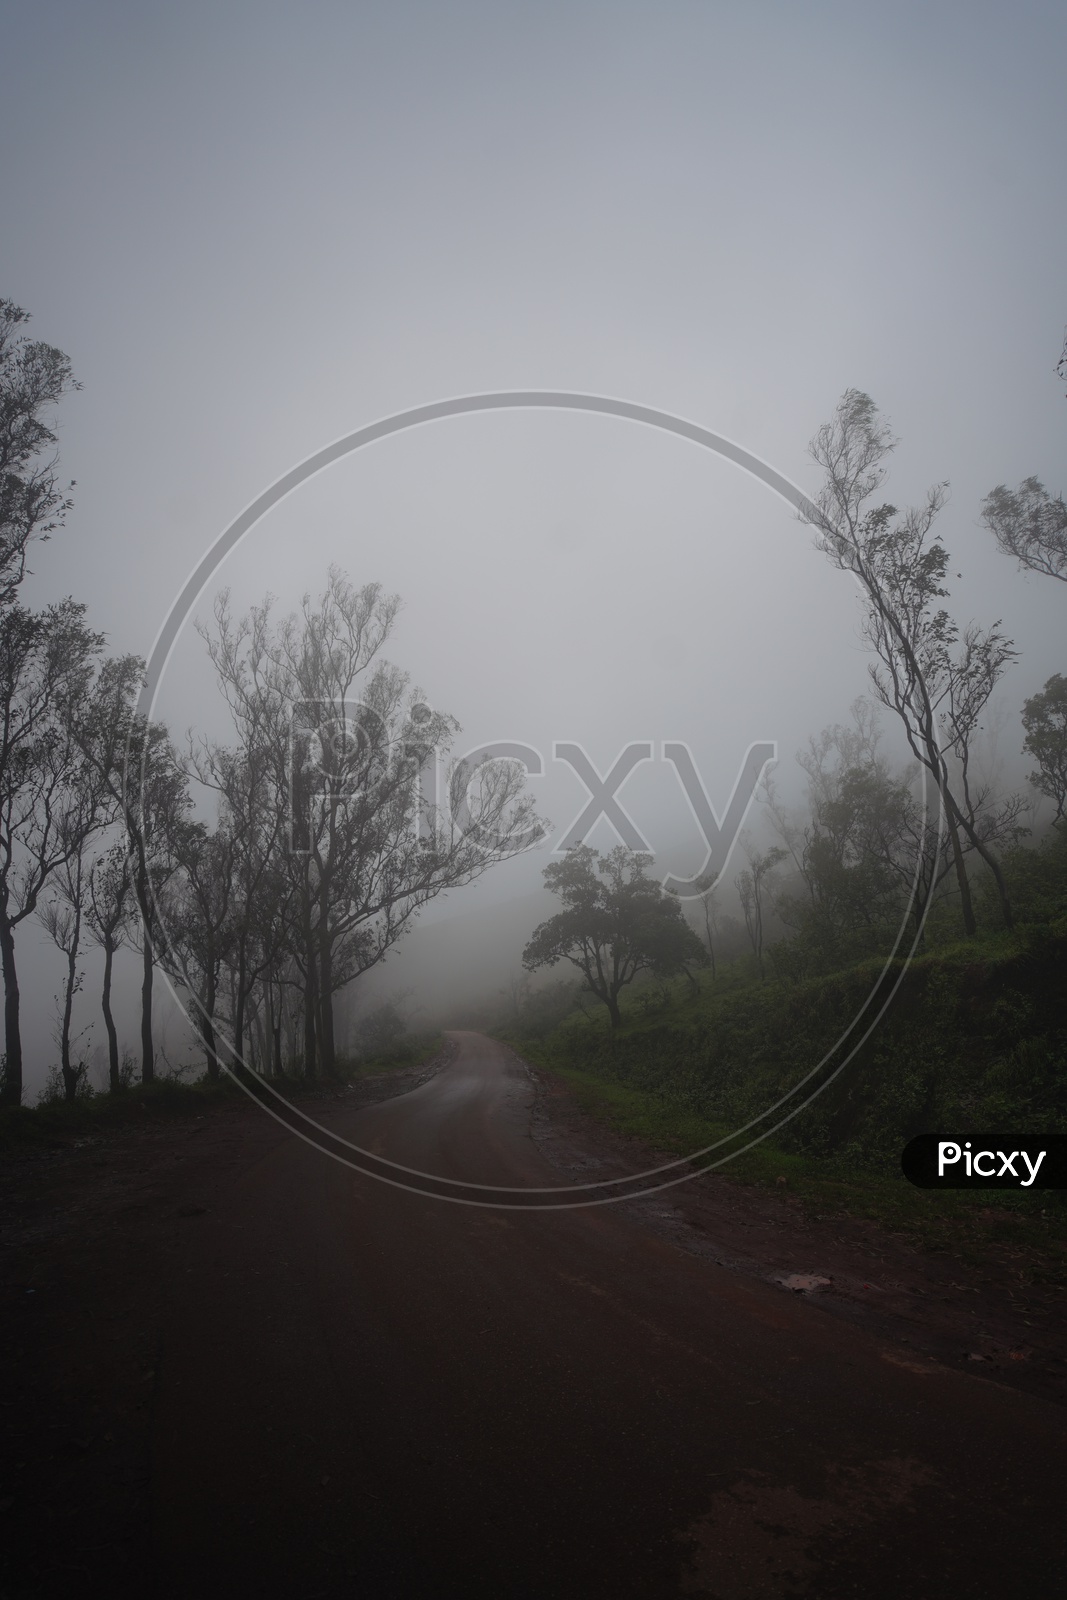 Foggy mornings Chickmangalur / Forest Views in Chickmangalur / Valleys In Chickmangalur